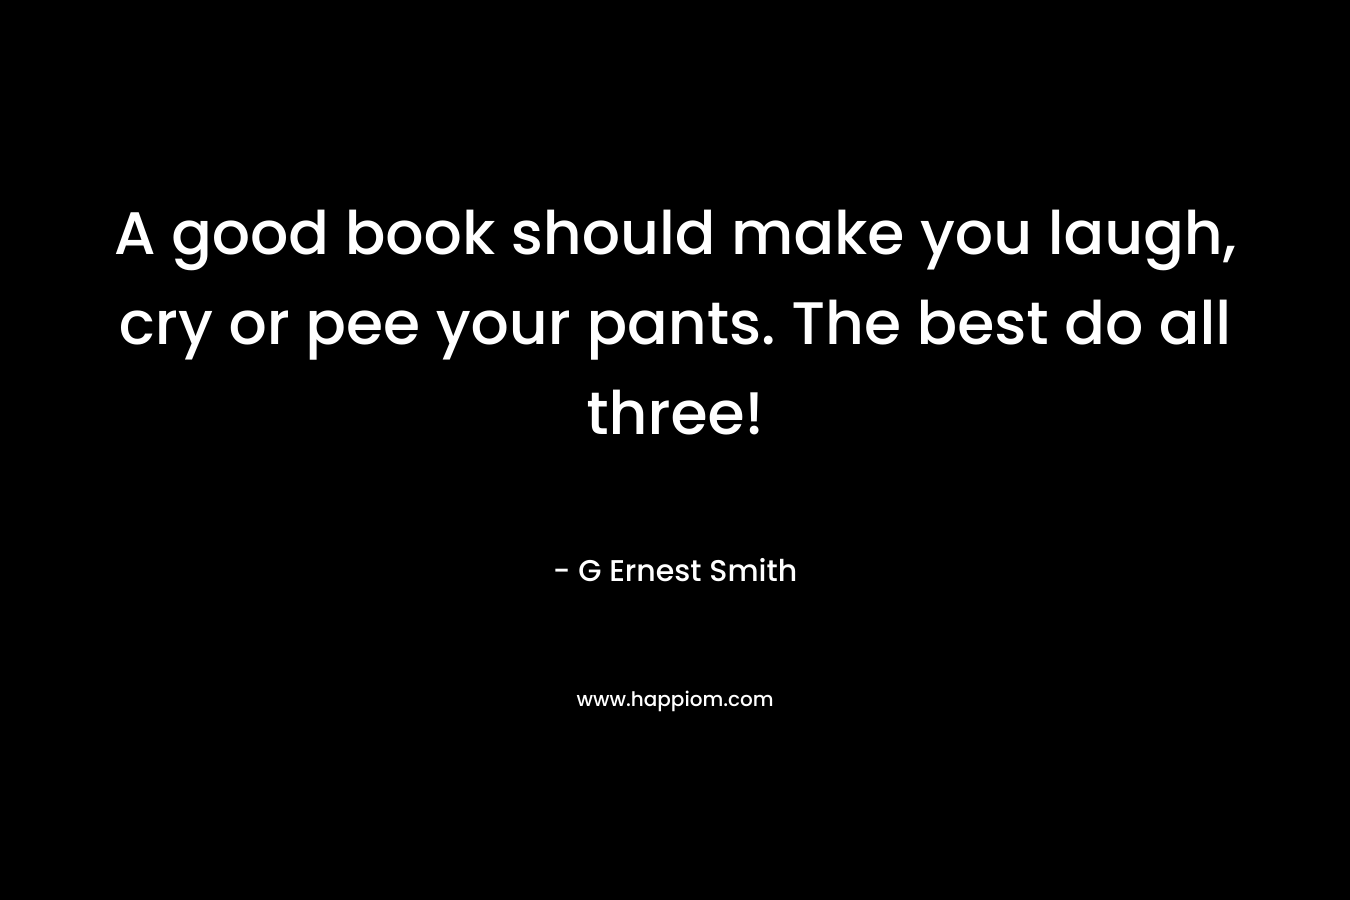 A good book should make you laugh, cry or pee your pants. The best do all three!